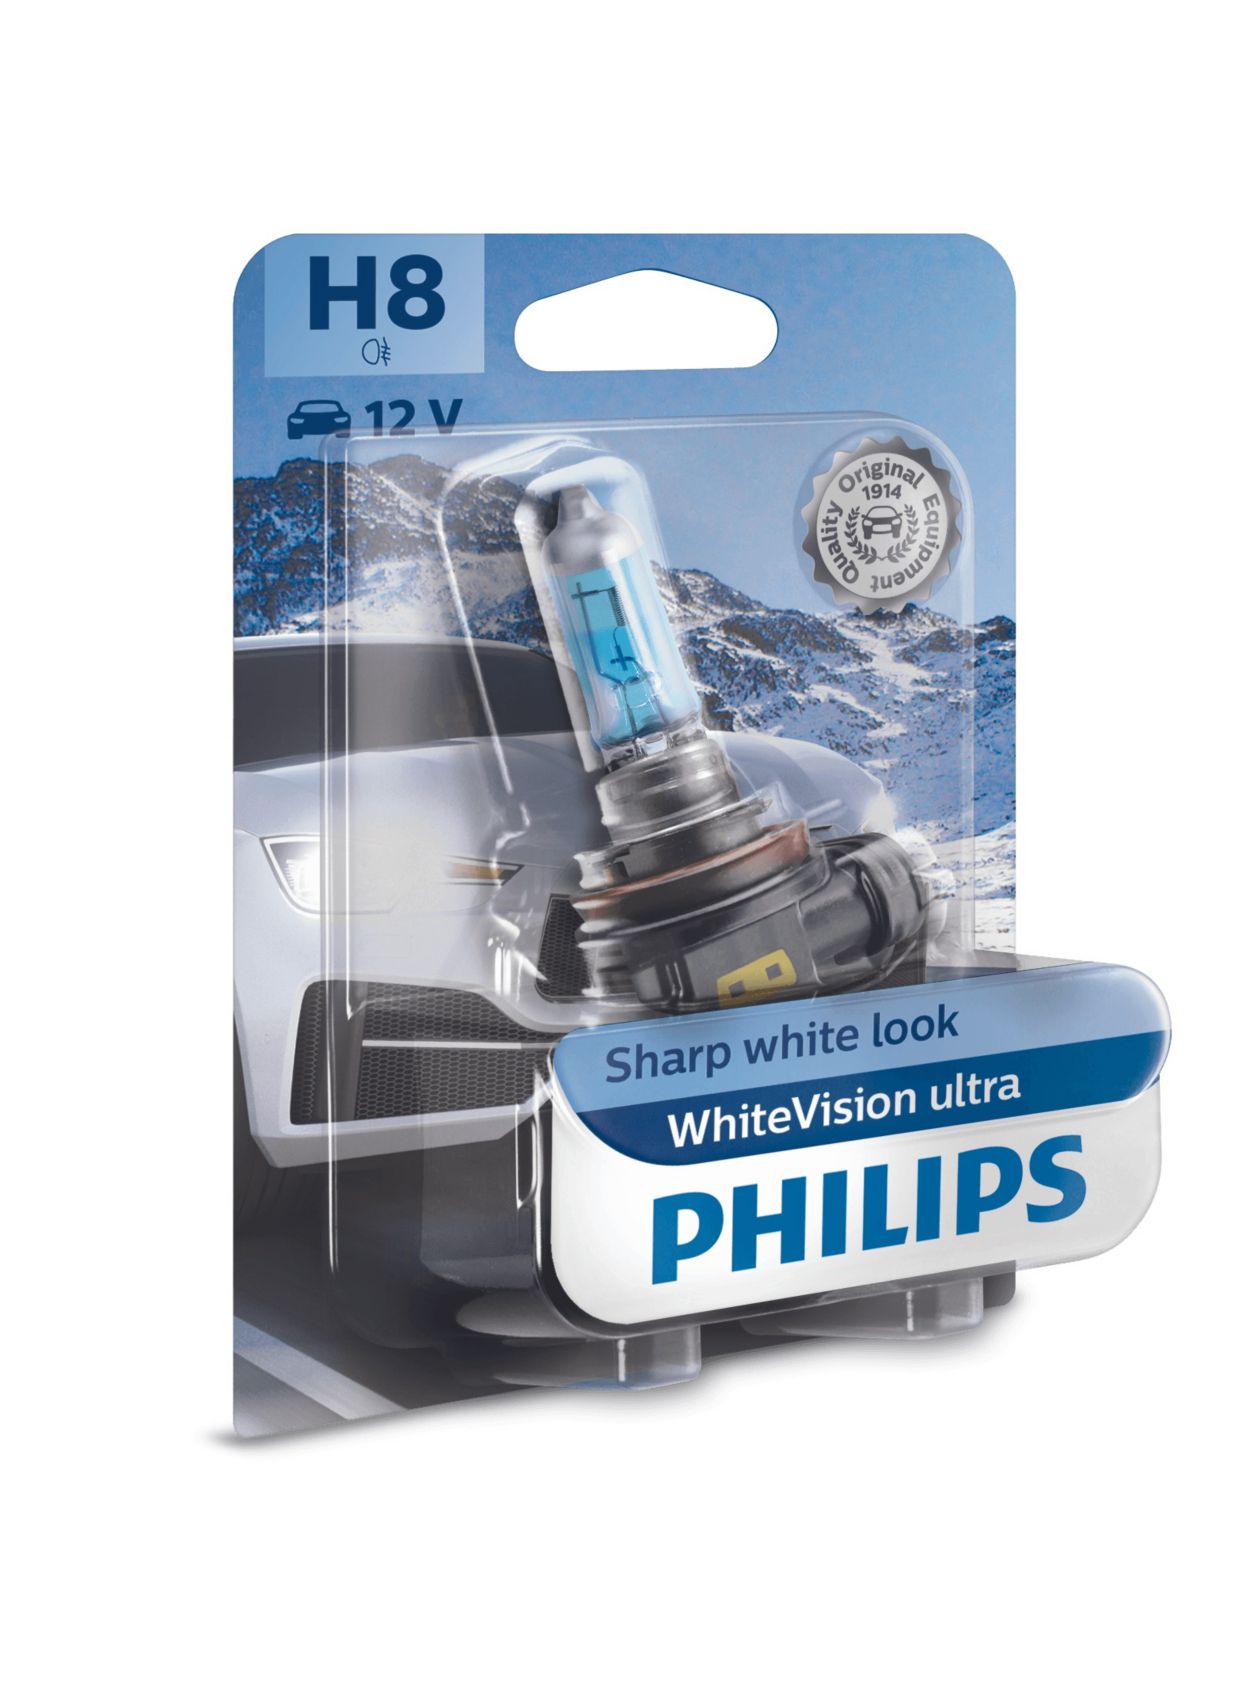 What's the difference between Philips WhiteVision and Philips Blue